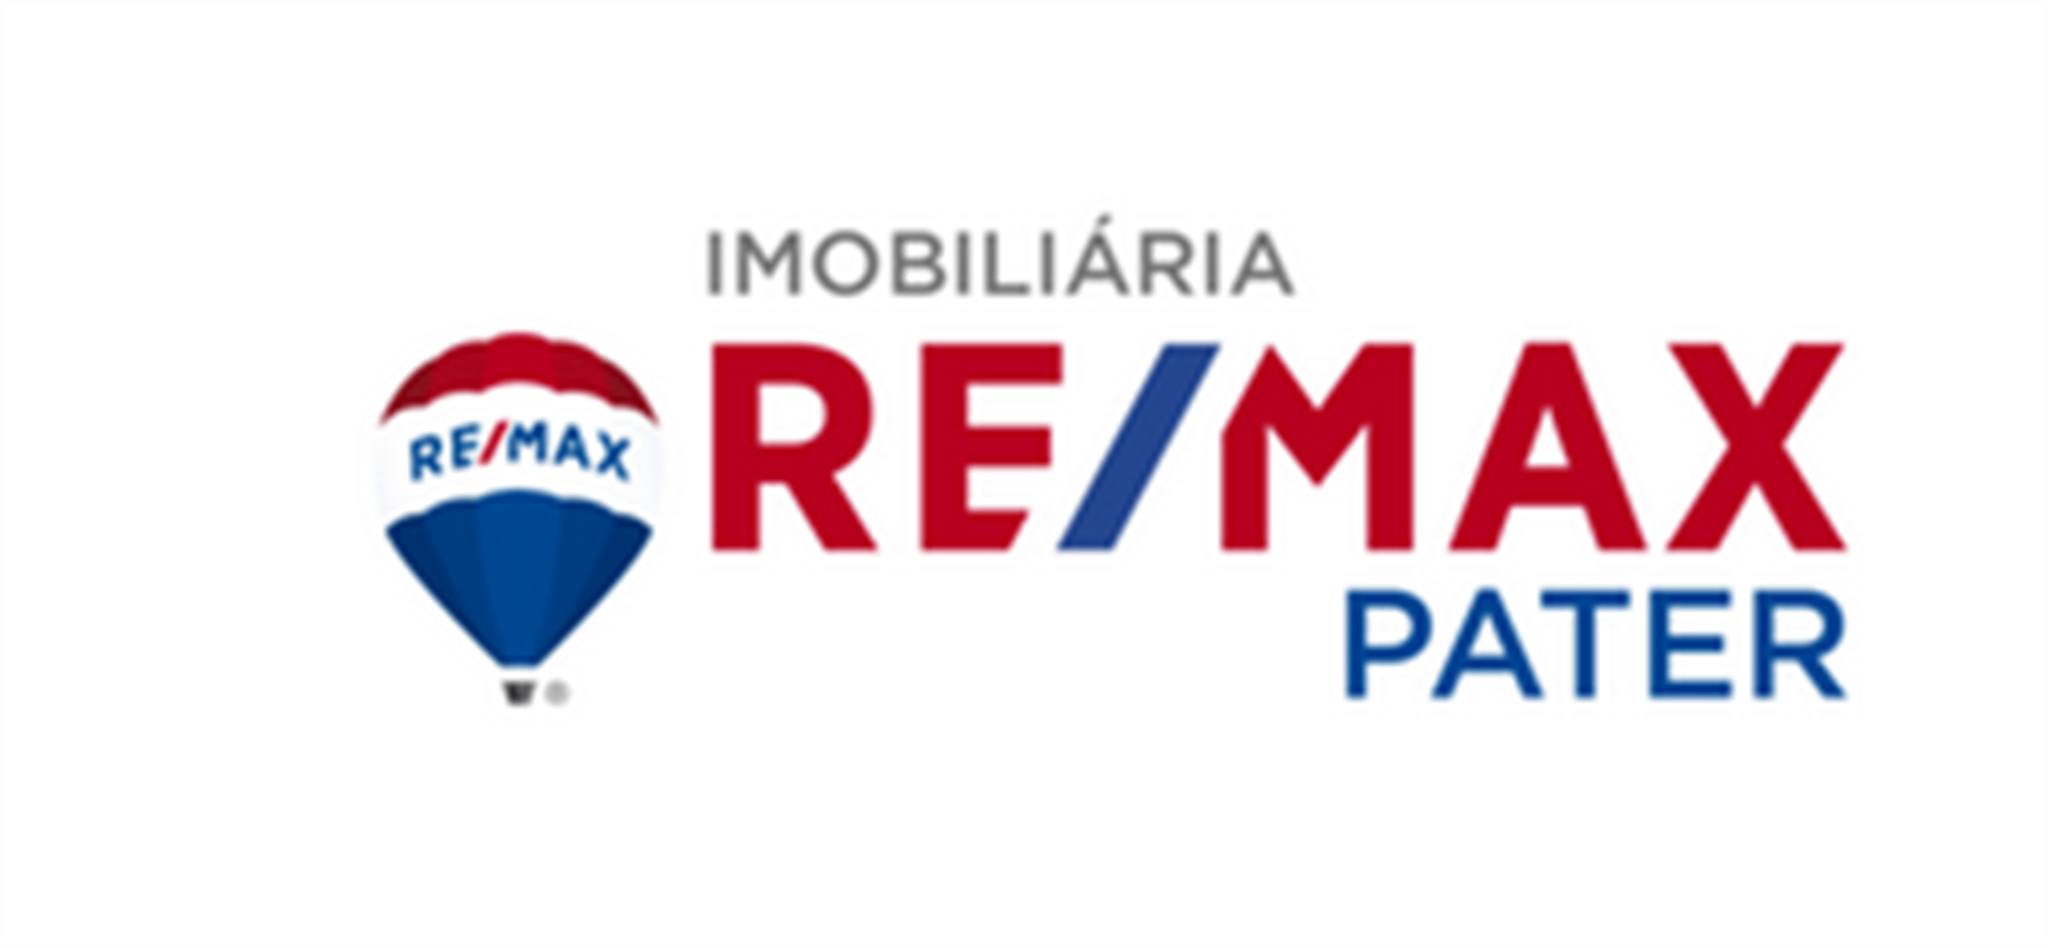 RE/MAX PATER